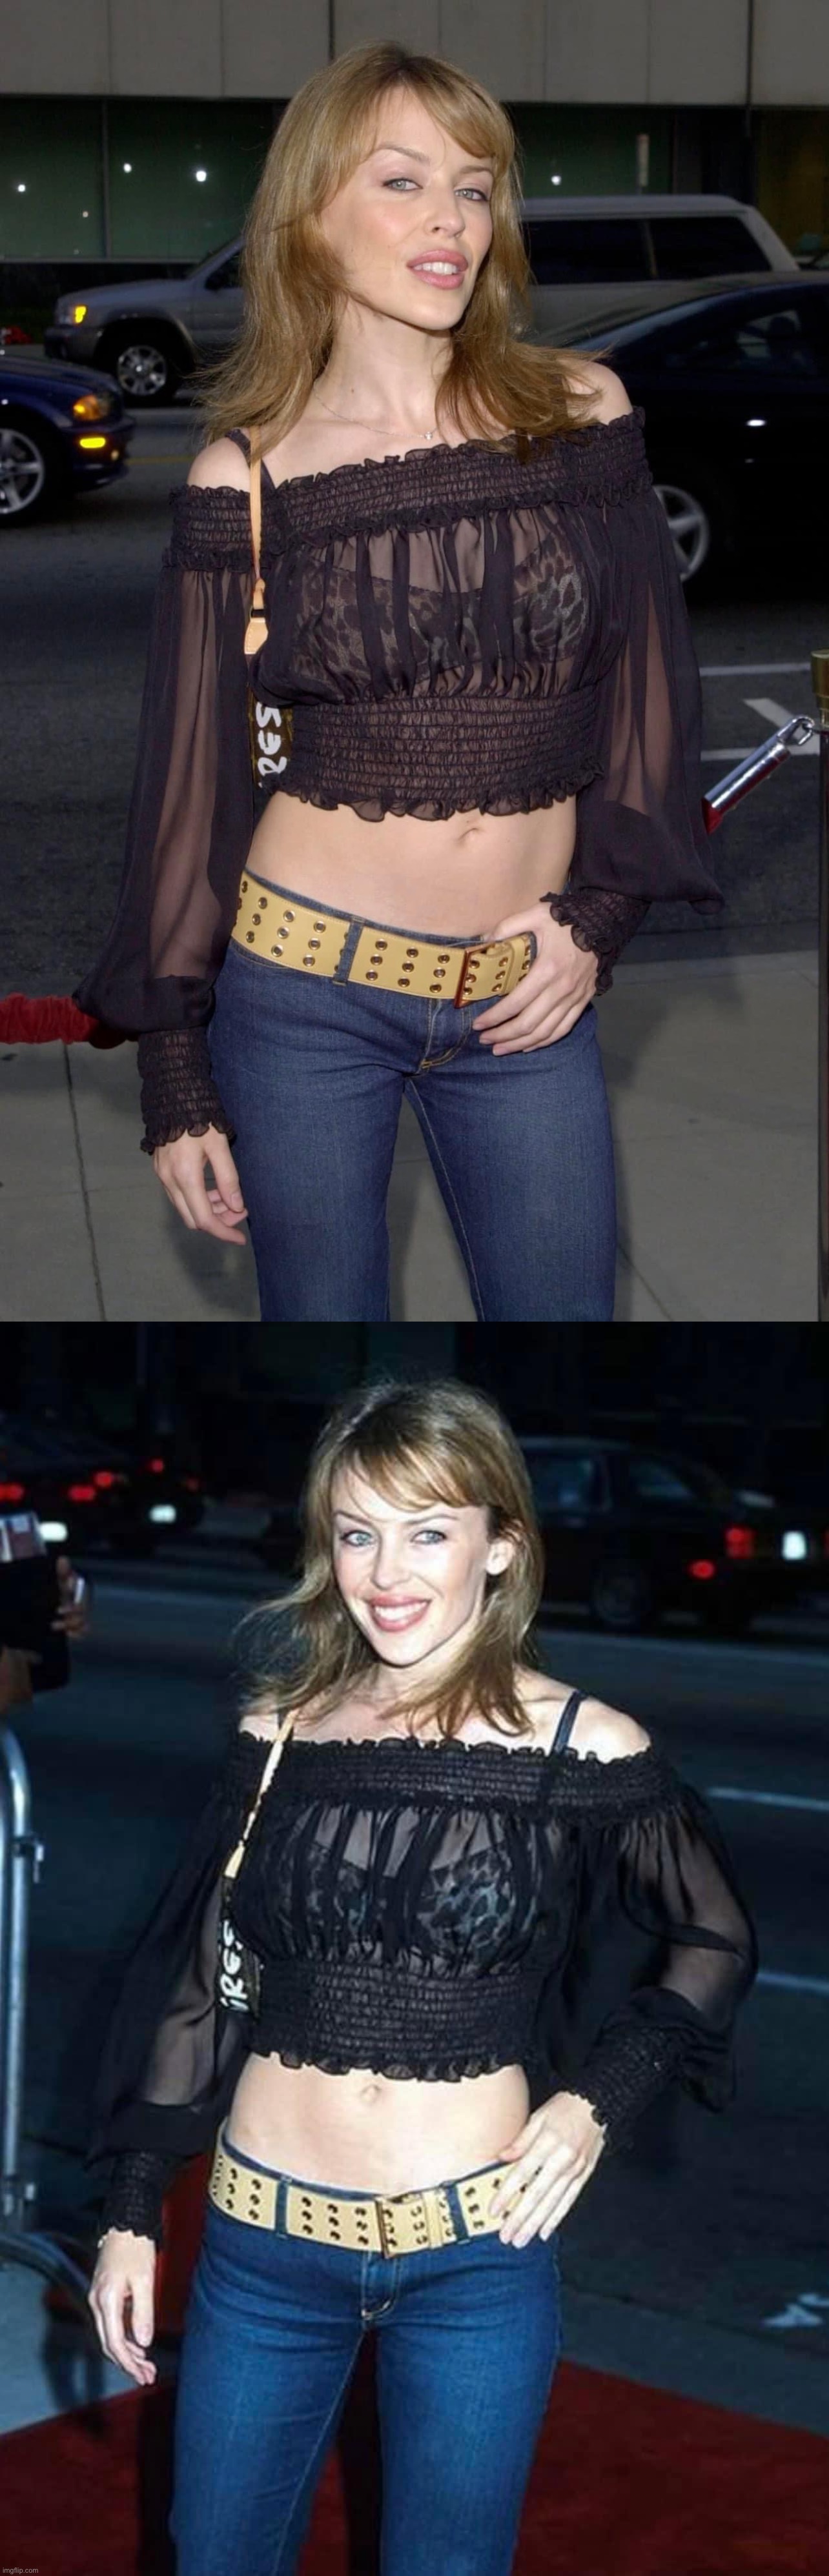 image tagged in kylie minogue | made w/ Imgflip meme maker